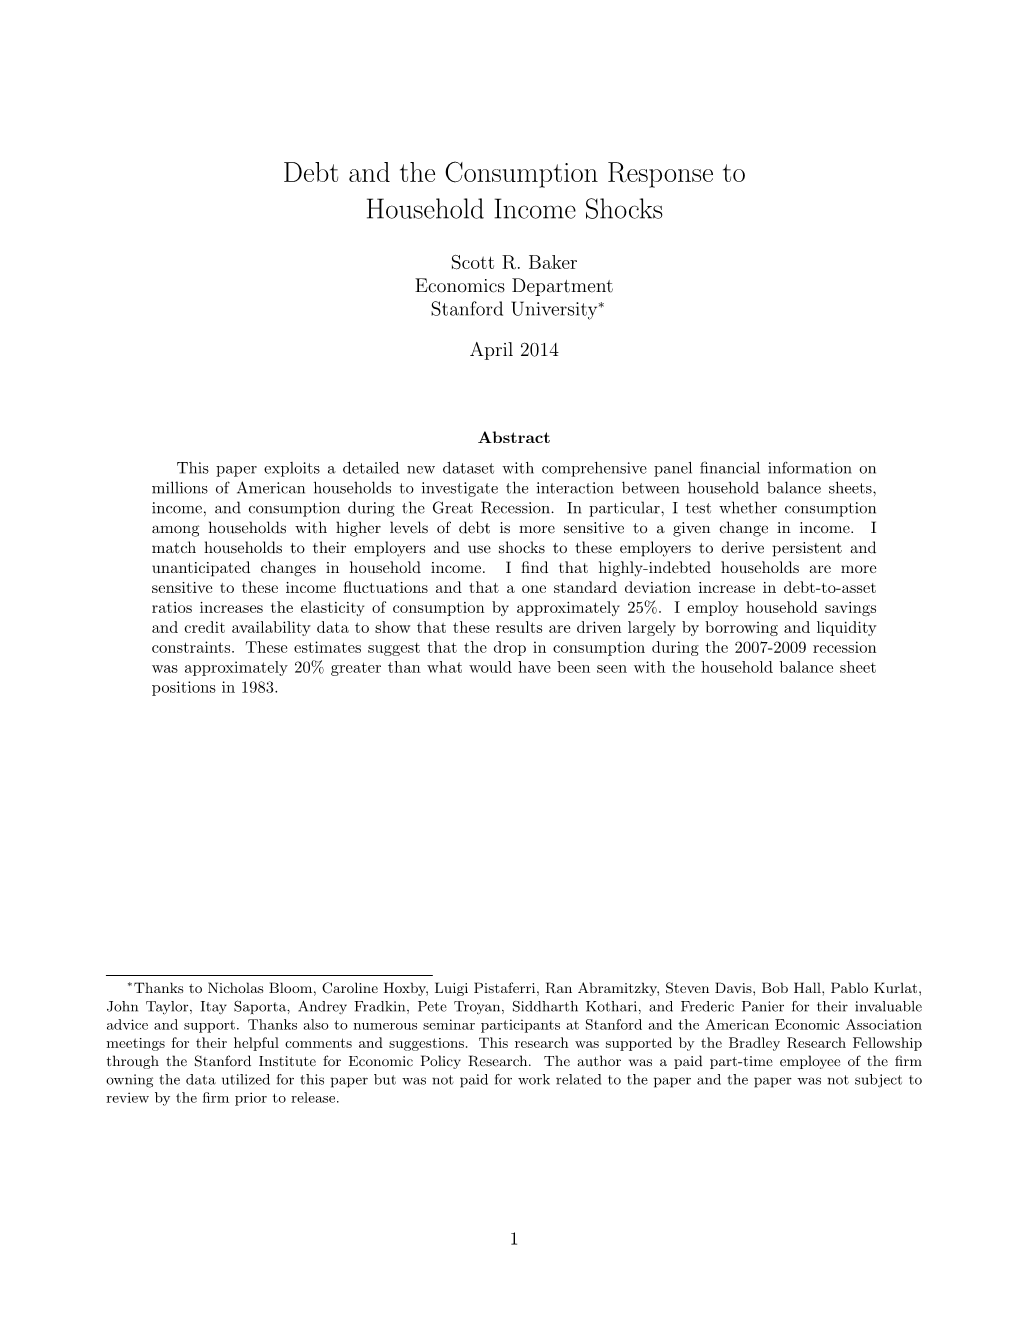 Debt and the Consumption Response to Household Income Shocks